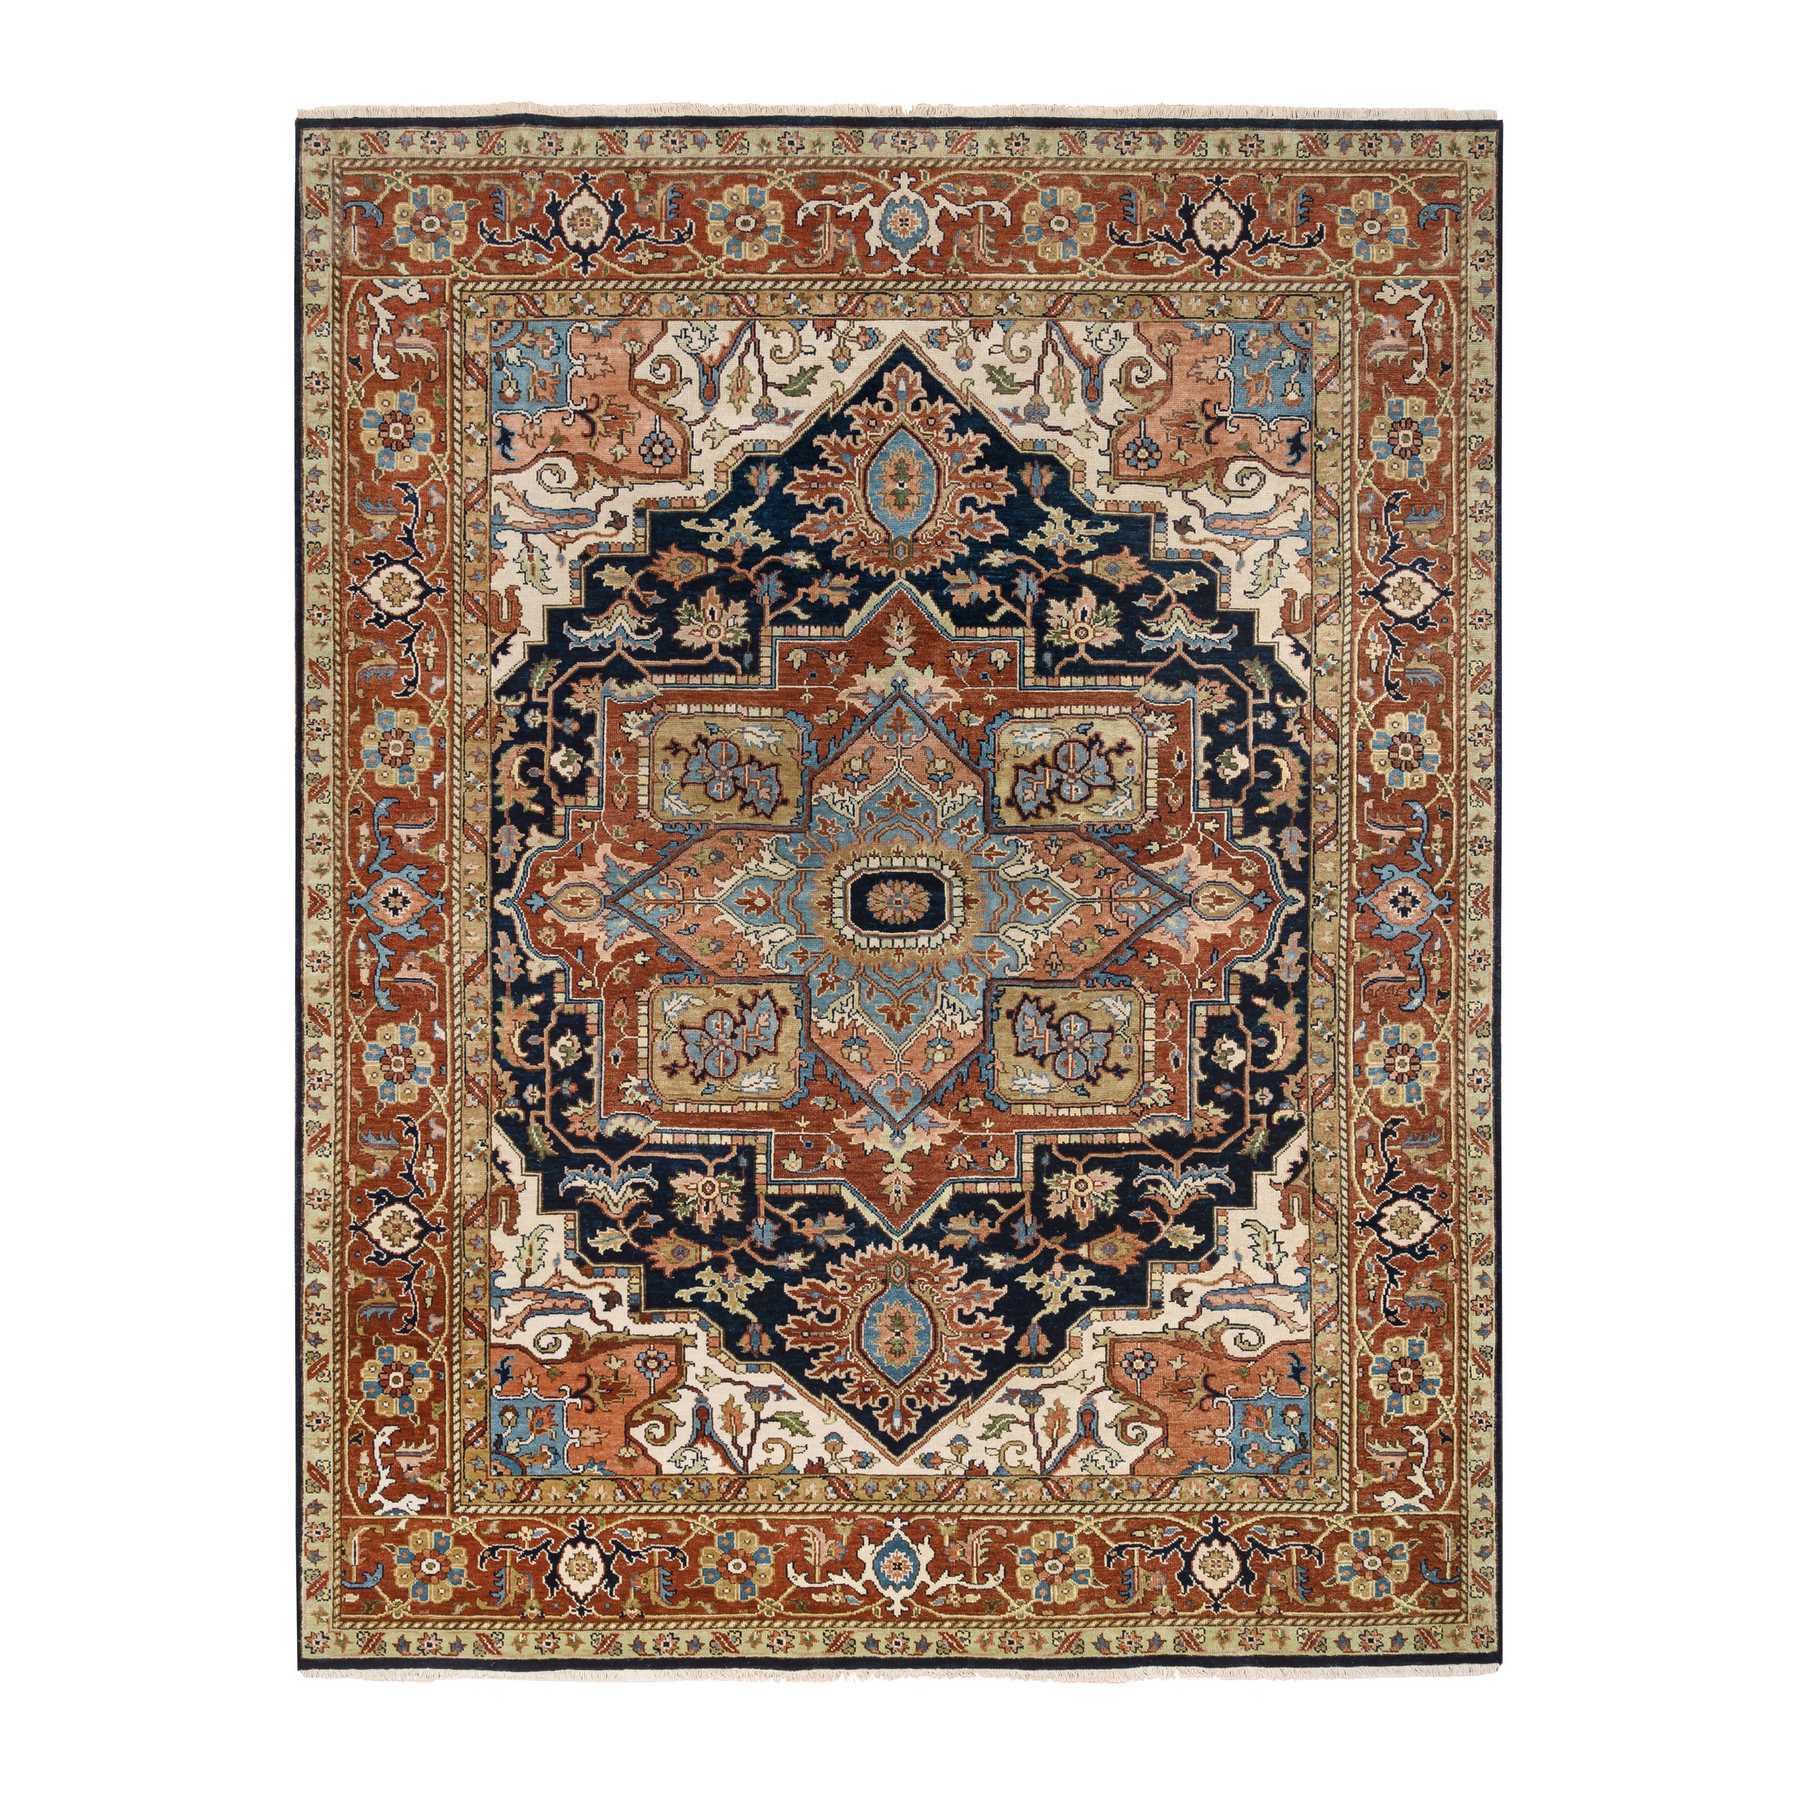 8'x9'10" Navy and Rust, Pure Wool Hand Woven, Heriz with Classic Geometric Medallion Design Thick and Plush, Oriental Rug 